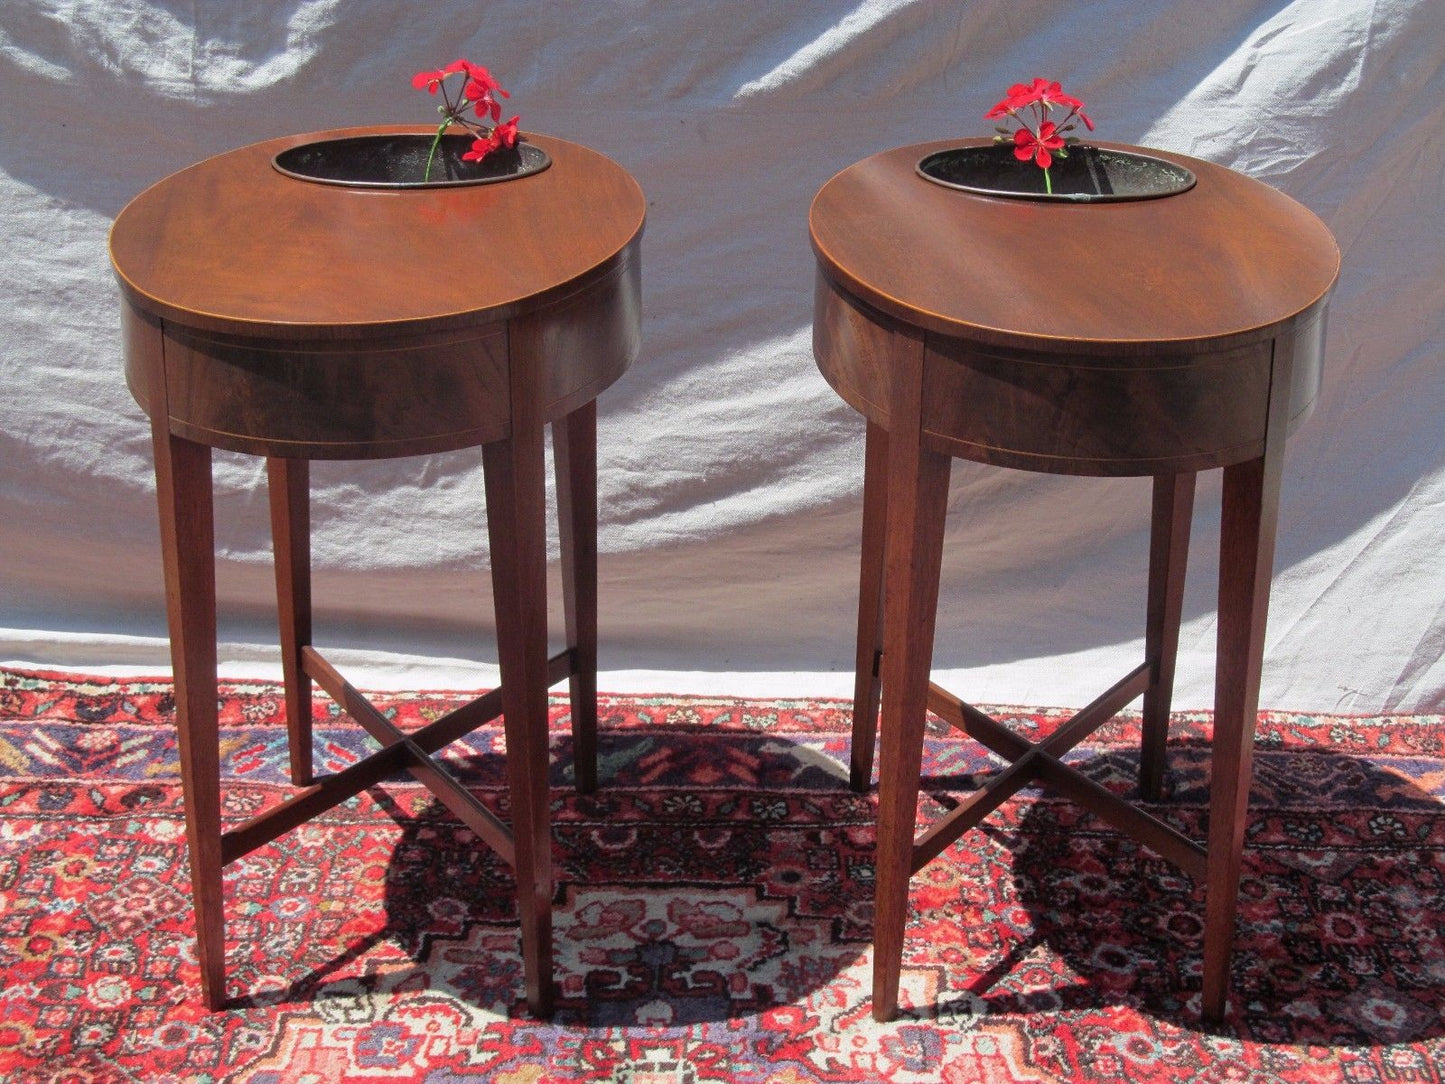 FEDERAL STYLED MAHOGANY PLANTER OVAL FORMED TABLES ON CROSS X STRETCHER BASES